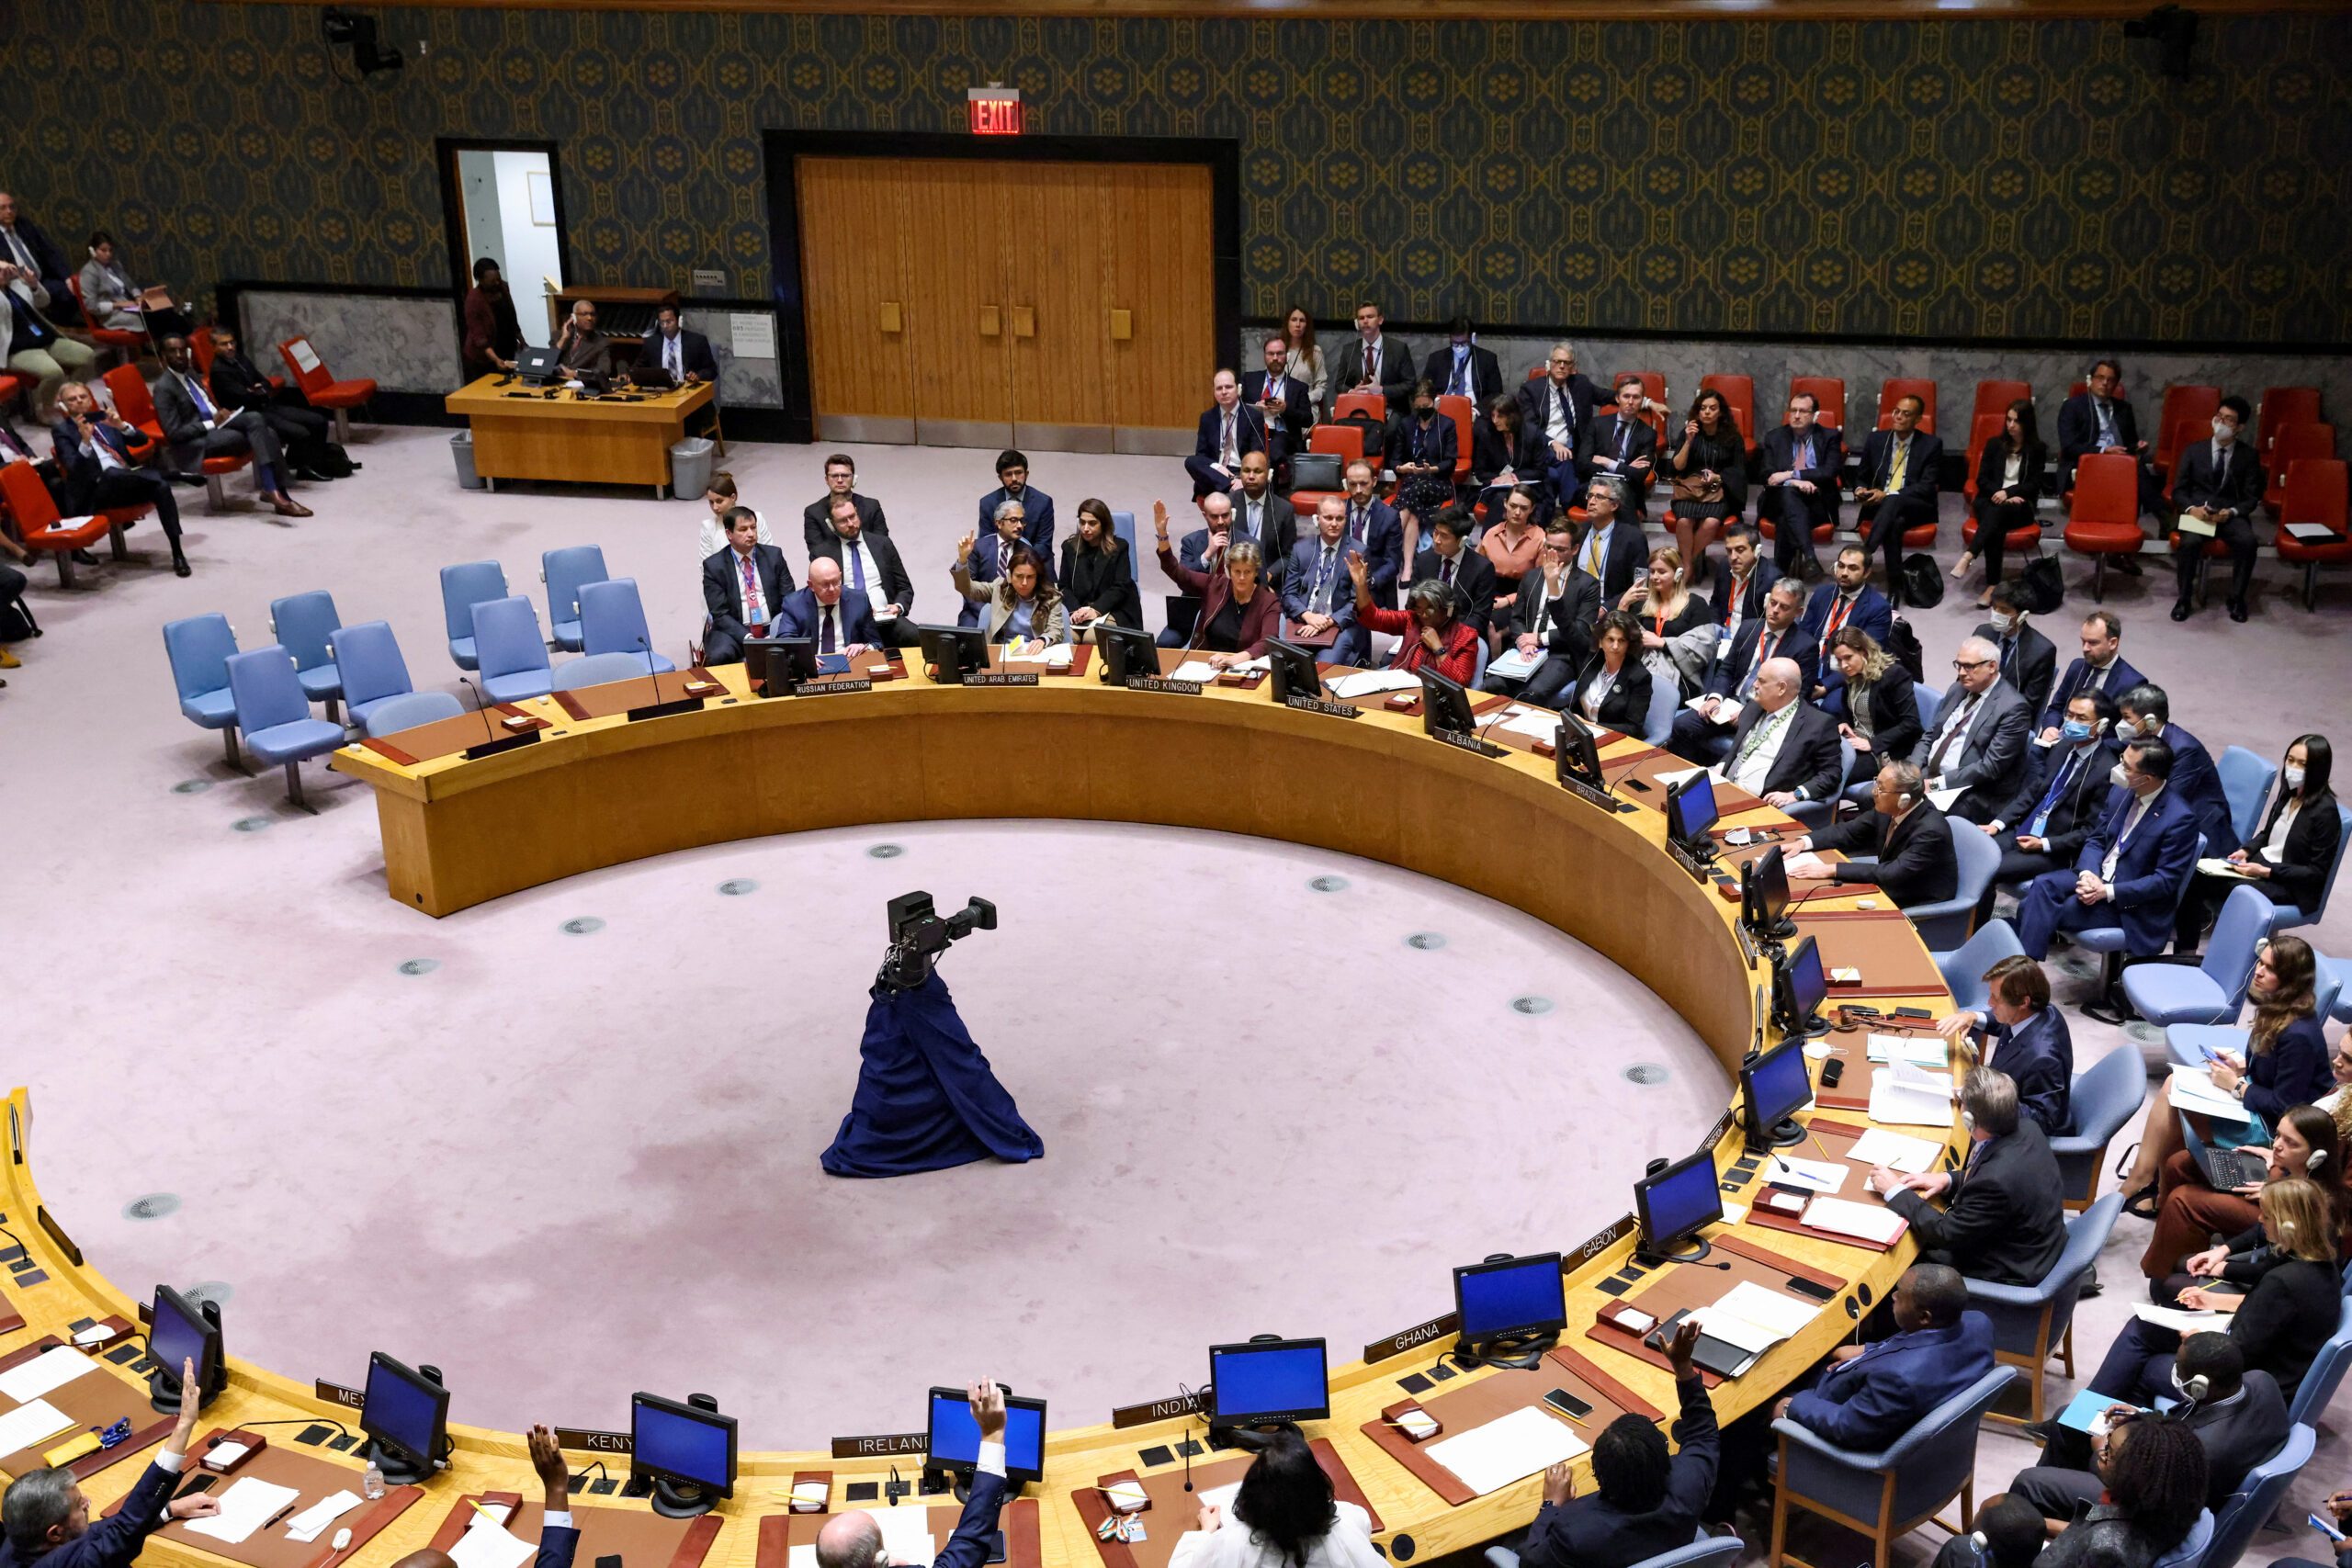 Russia vetoes UN resolution on proclaimed annexations, China abstains